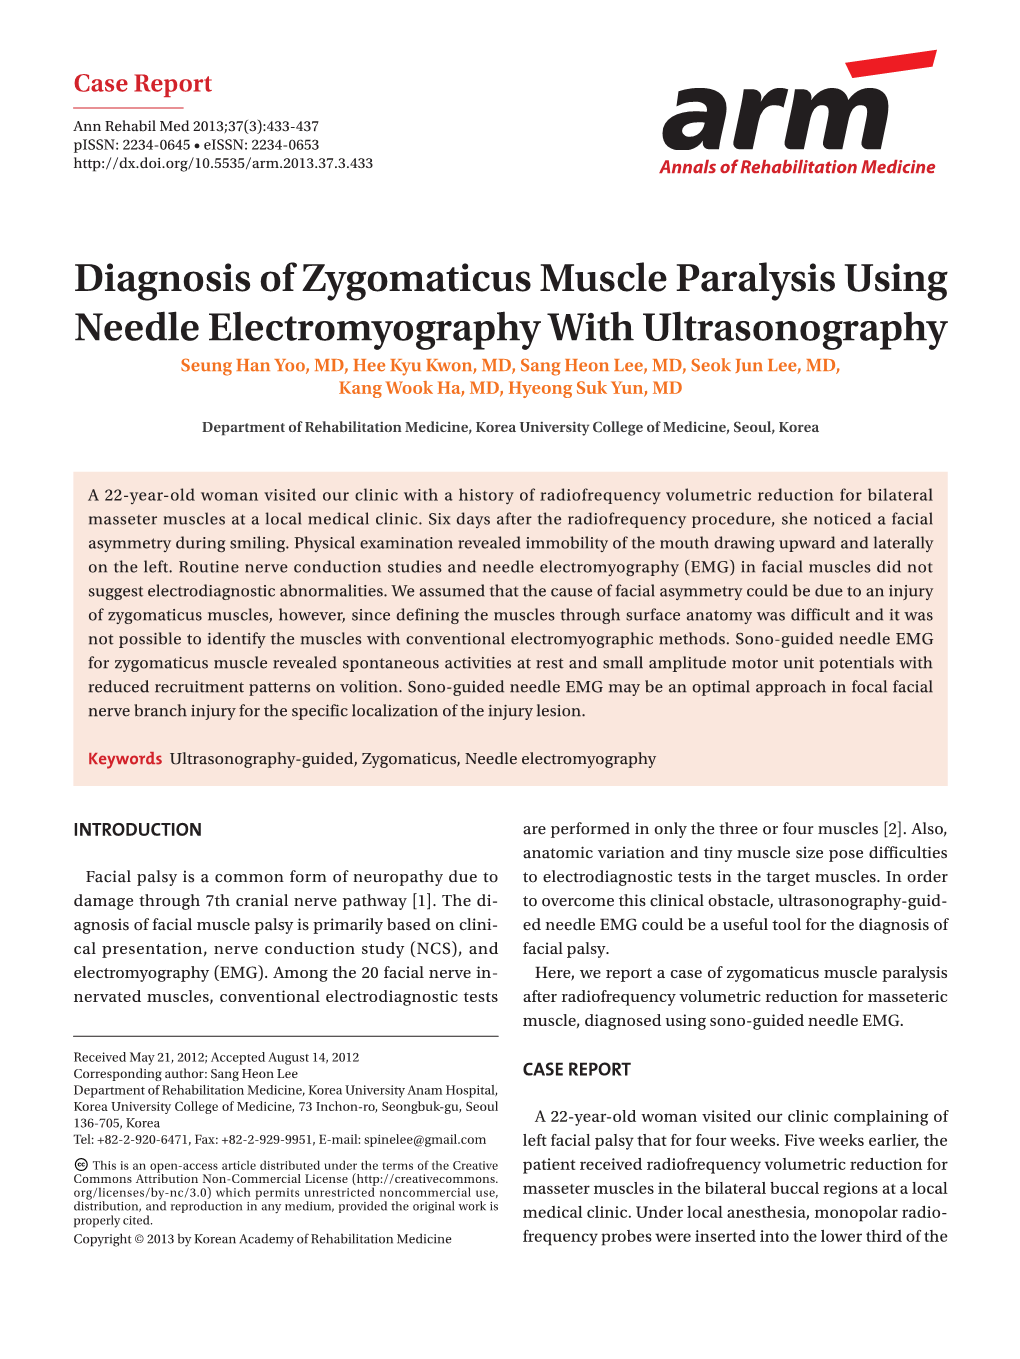 Diagnosis of Zygomaticus Muscle Paralysis Using Needle